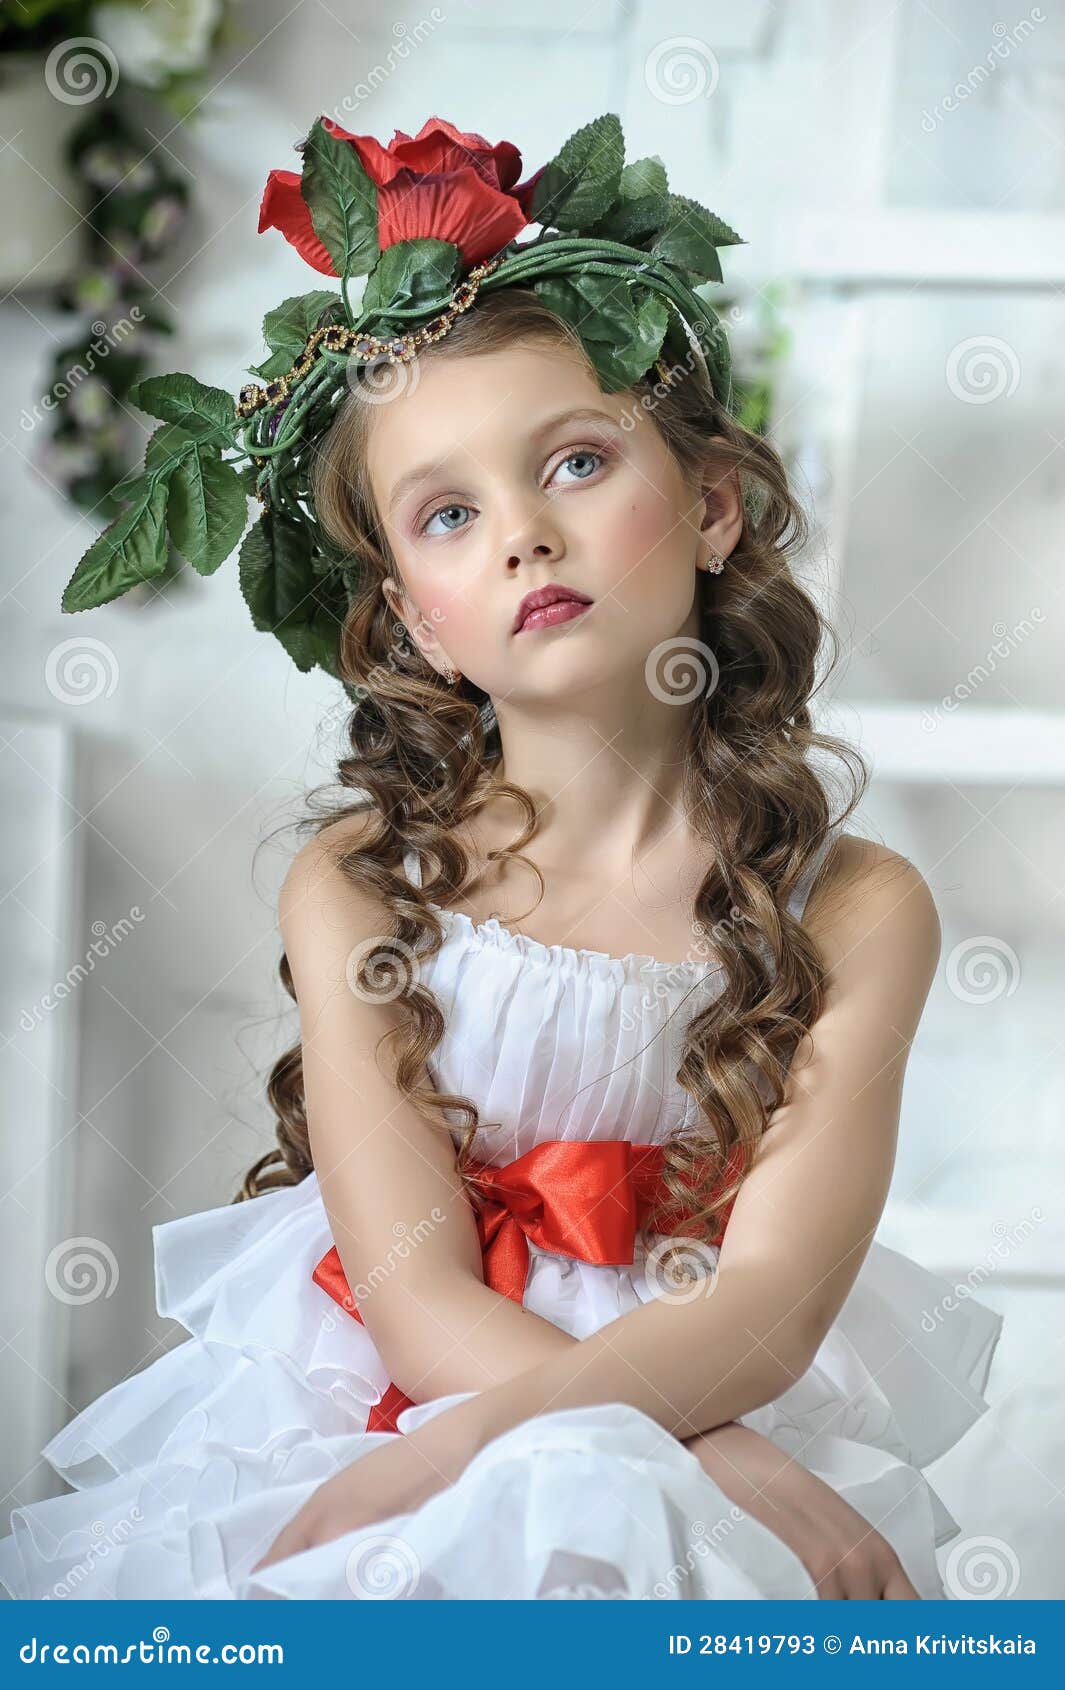 Girl with flowers stock image. Image of eyes, blossom - 28419793